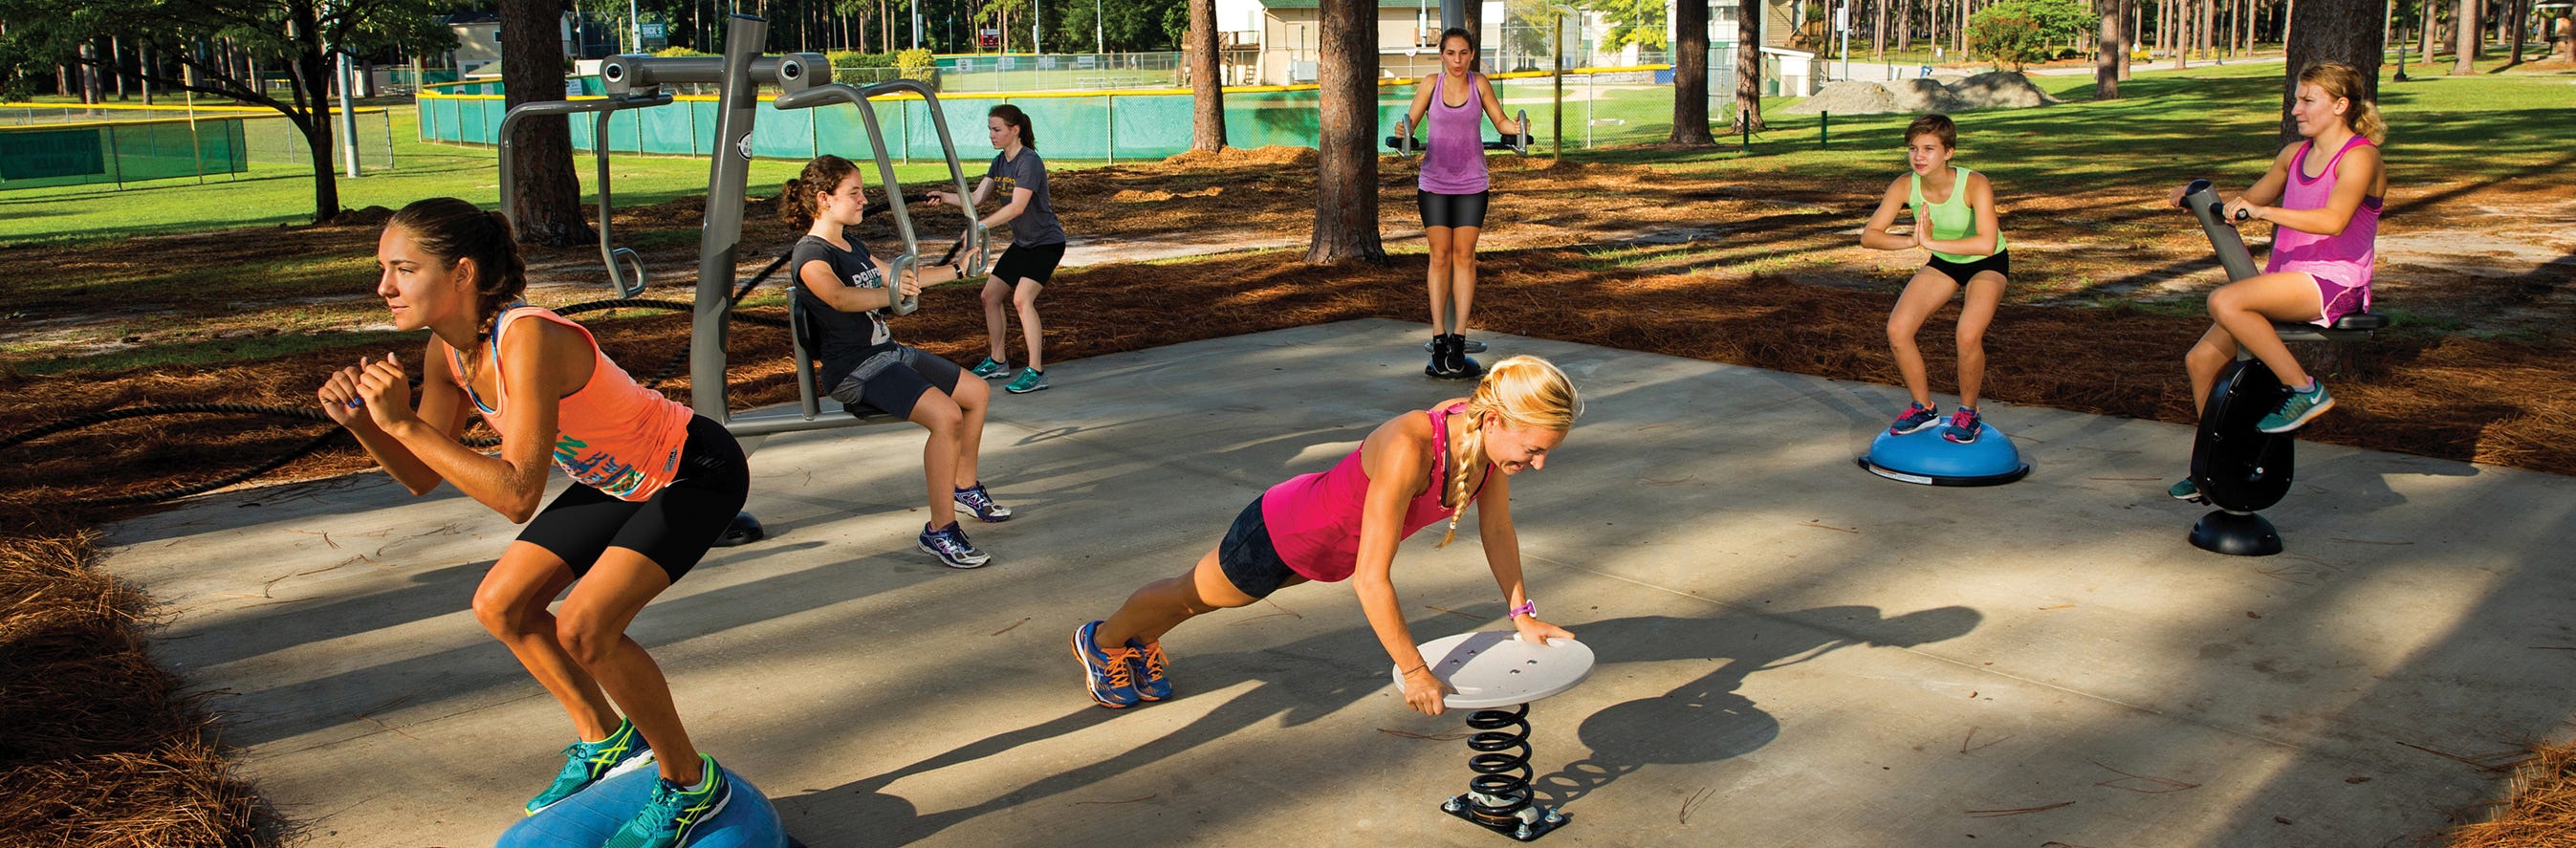 College and Outdoor Fitness - A Natural Fit